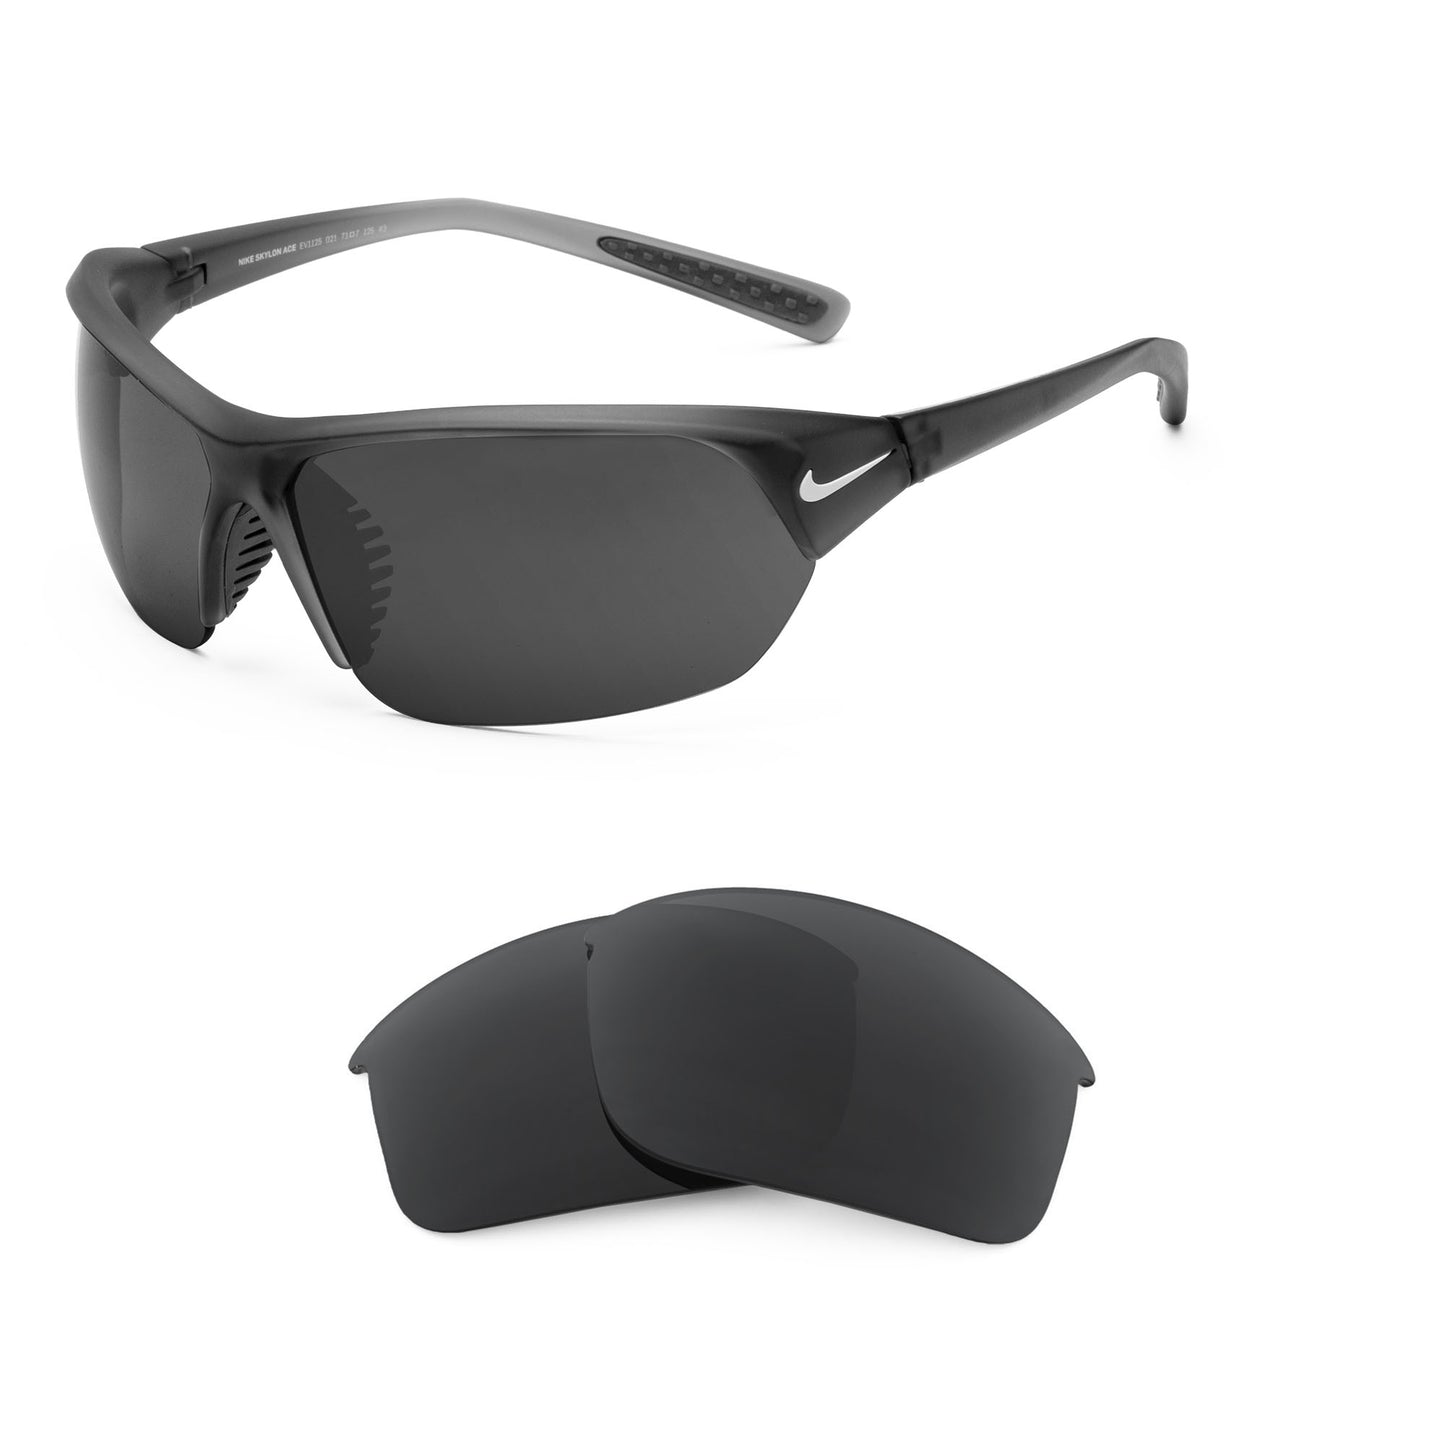 Nike Skylon Ace sunglasses with replacement lenses